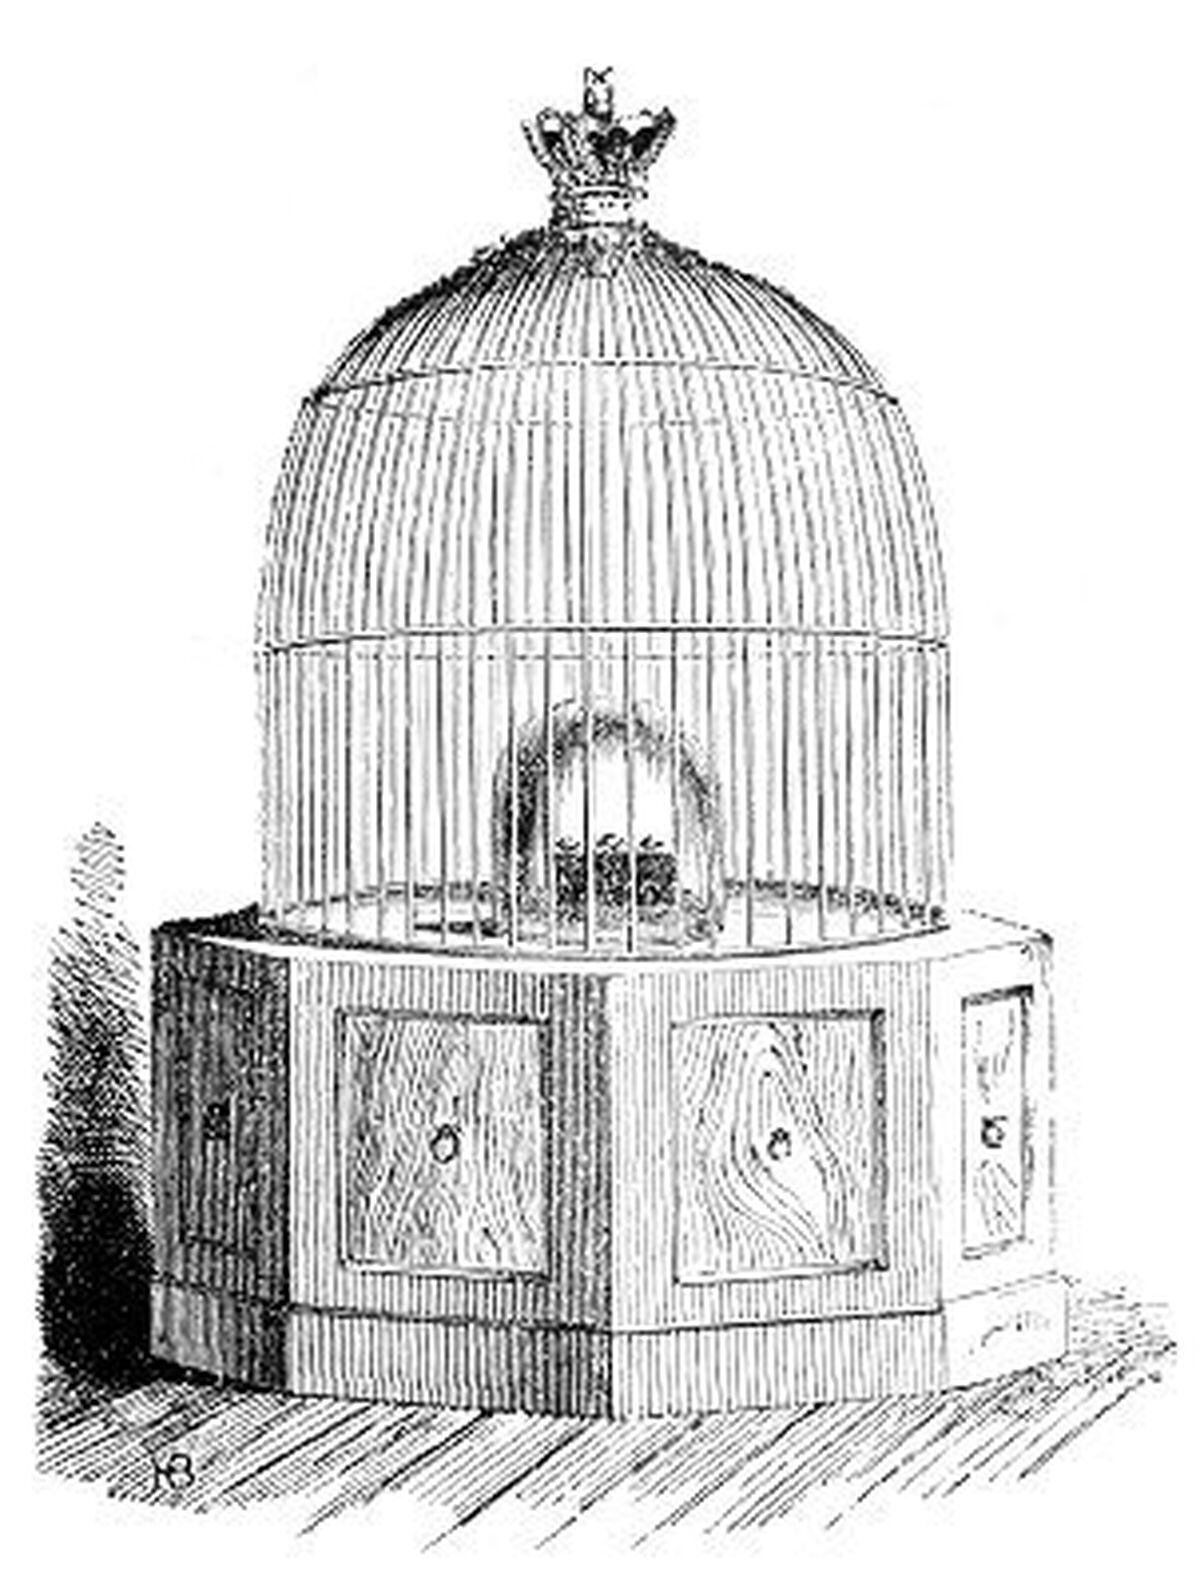 This strange contraption was used to display the priceless Koh-i-Nor diamond at the 1851 Festival of Britain